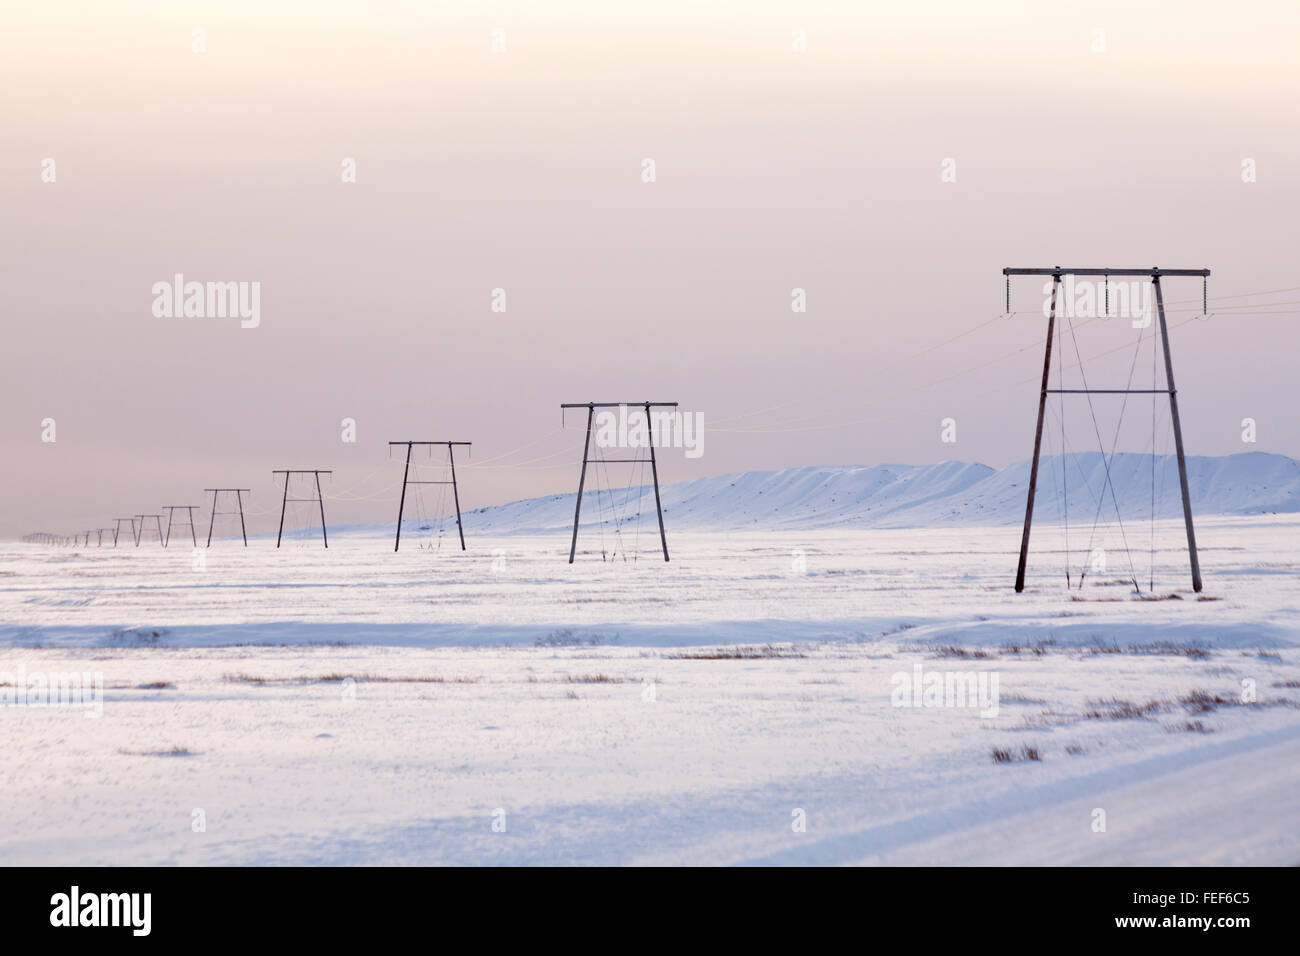 Row of electricity pylons receding into the distance at Iceland in January - minimalist landscape scenery scenic - snow minimalism Stock Photo